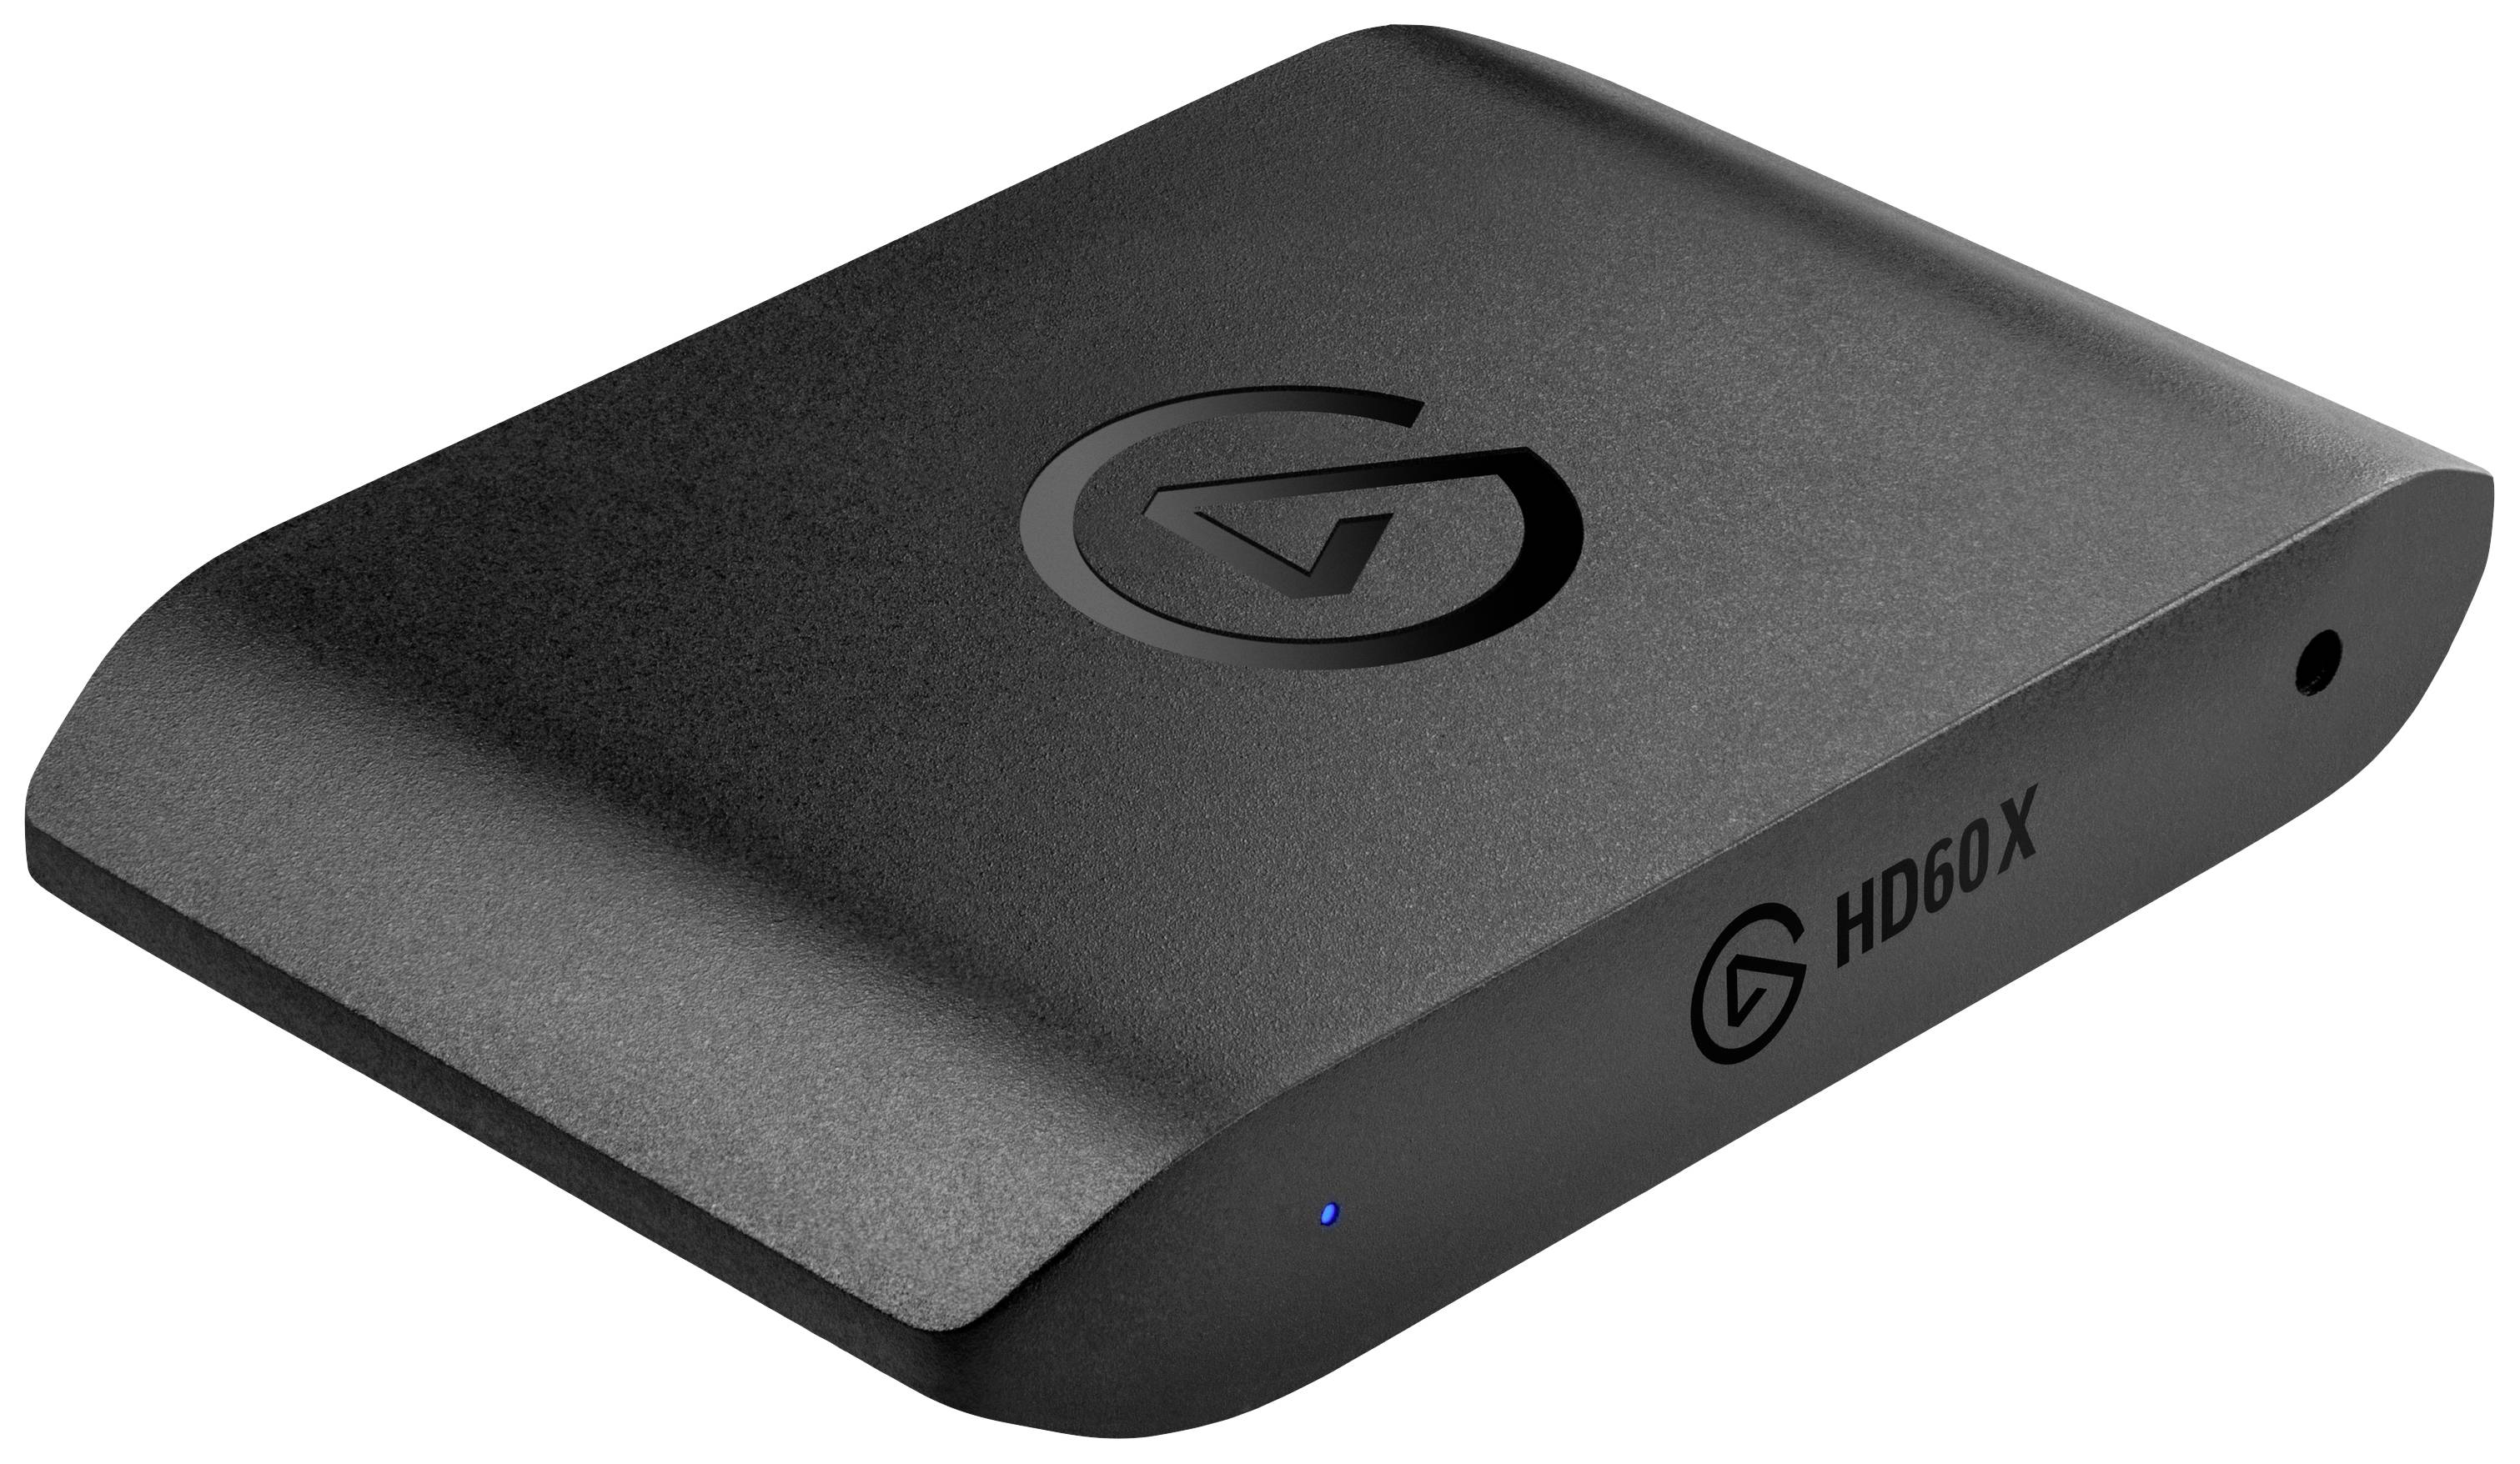 Buy Elgato Game Capture HD60 X Game capture Full HD resolution